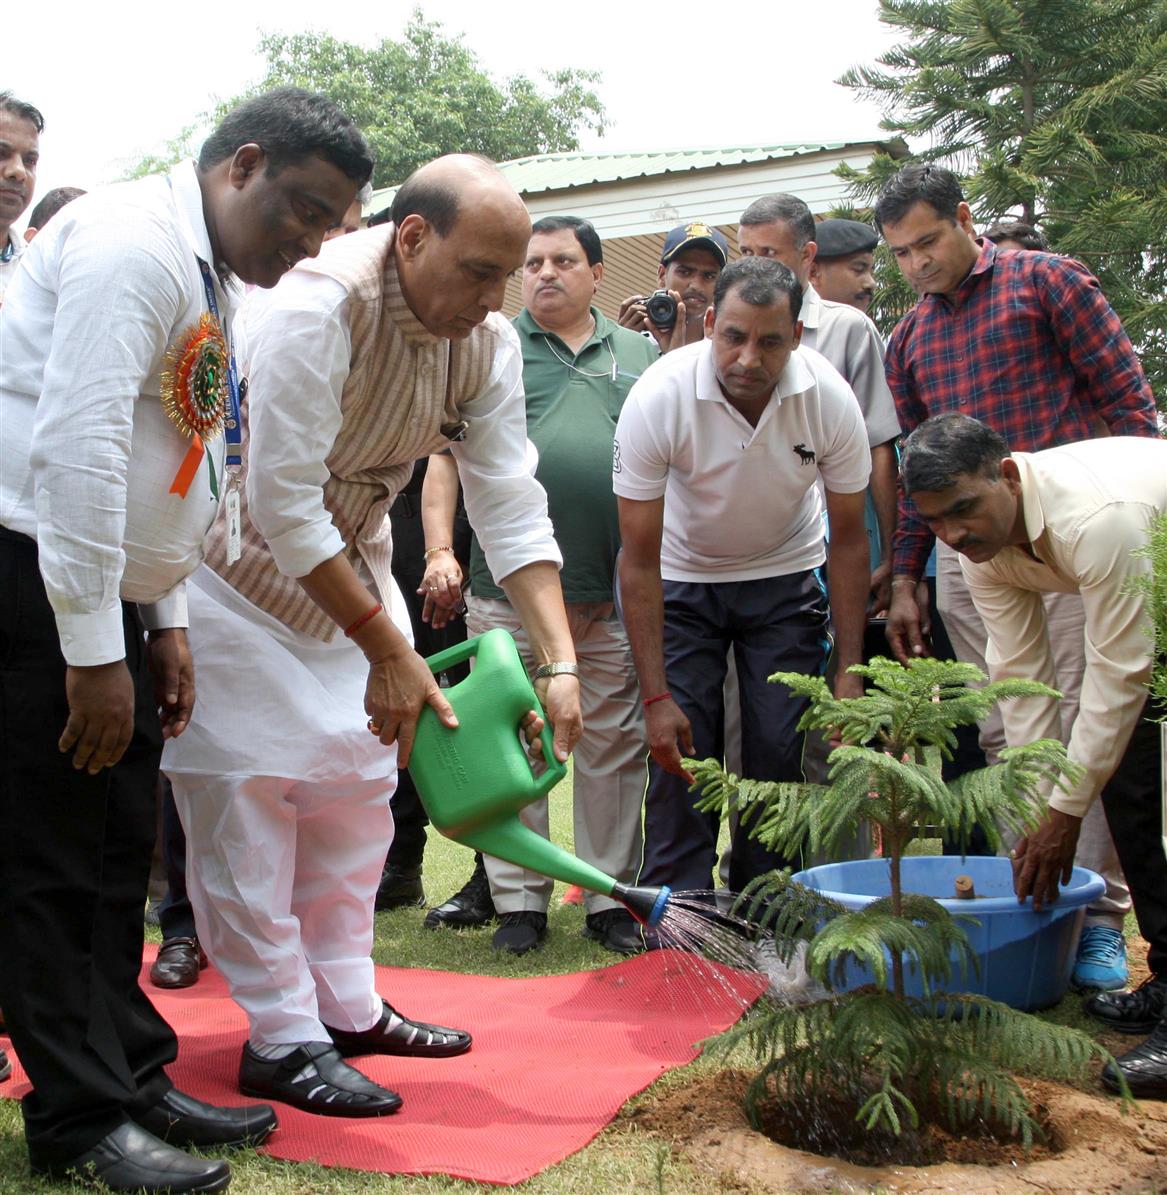 The Union Minister for Defence, Shri Rajnath Singh planting sapling at an event organised by ‘Veterans India’, on the occasion of Kargil Vijay Diwas, in New Delhi on July 21, 2019.